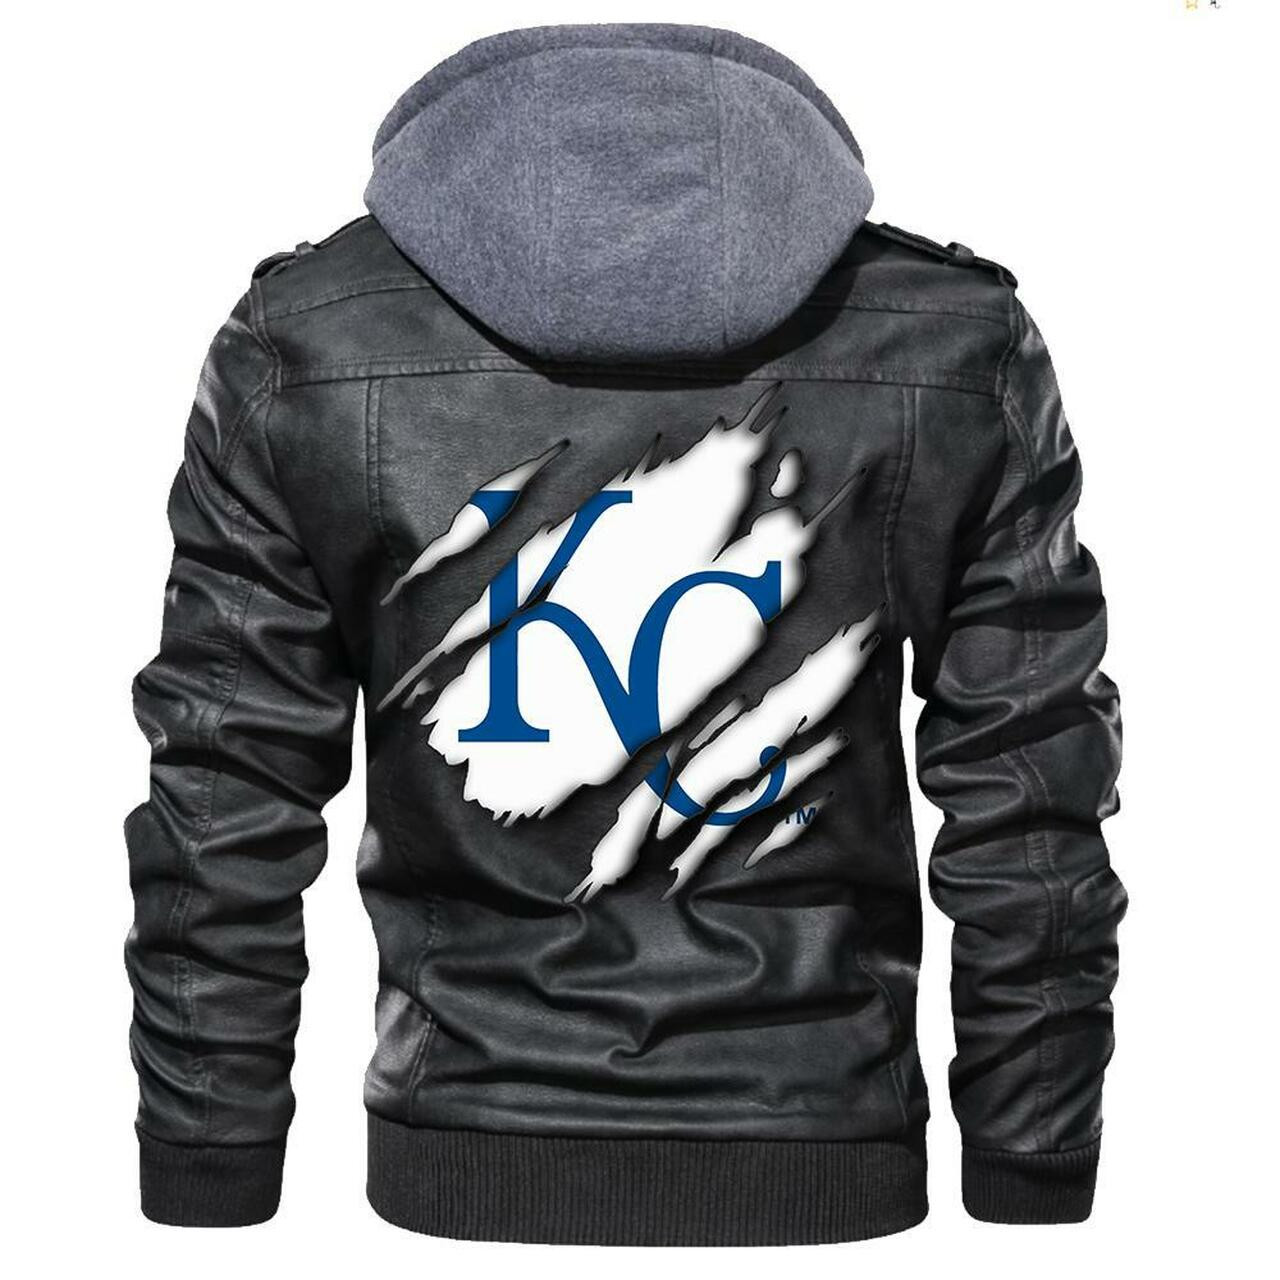 To get a great look, consider purchasing This New Leather Jacket 203